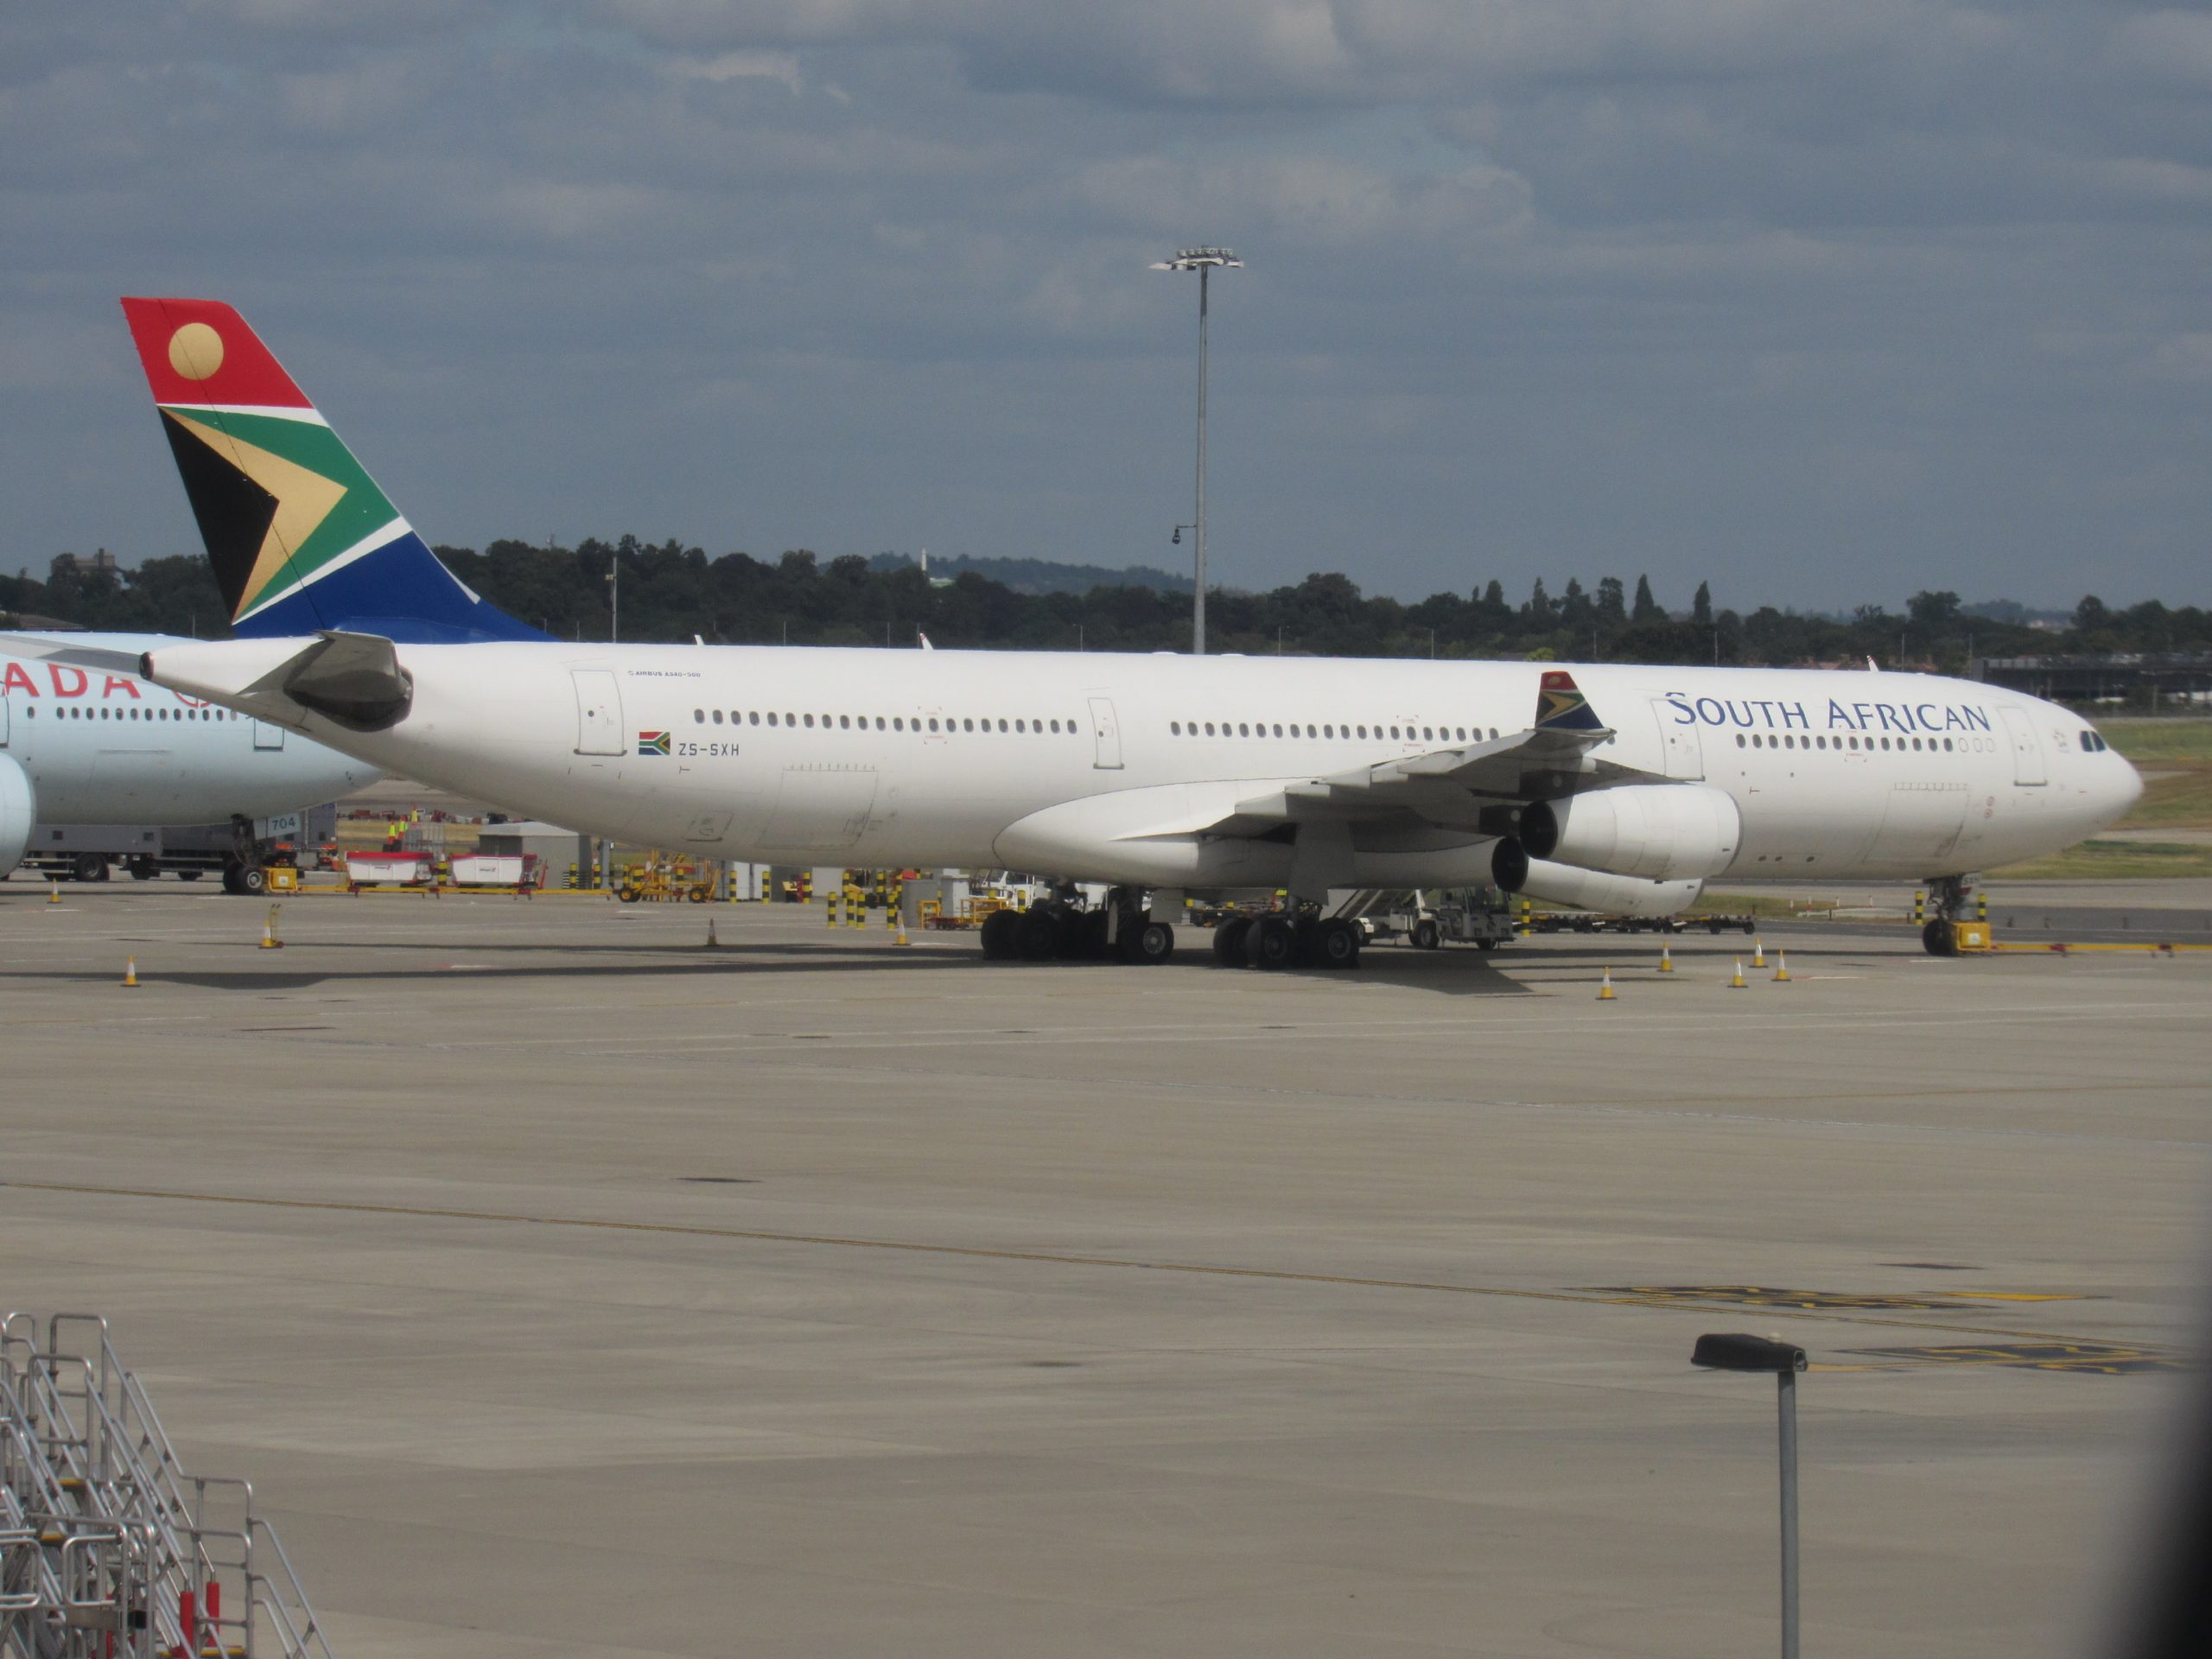 South African A340